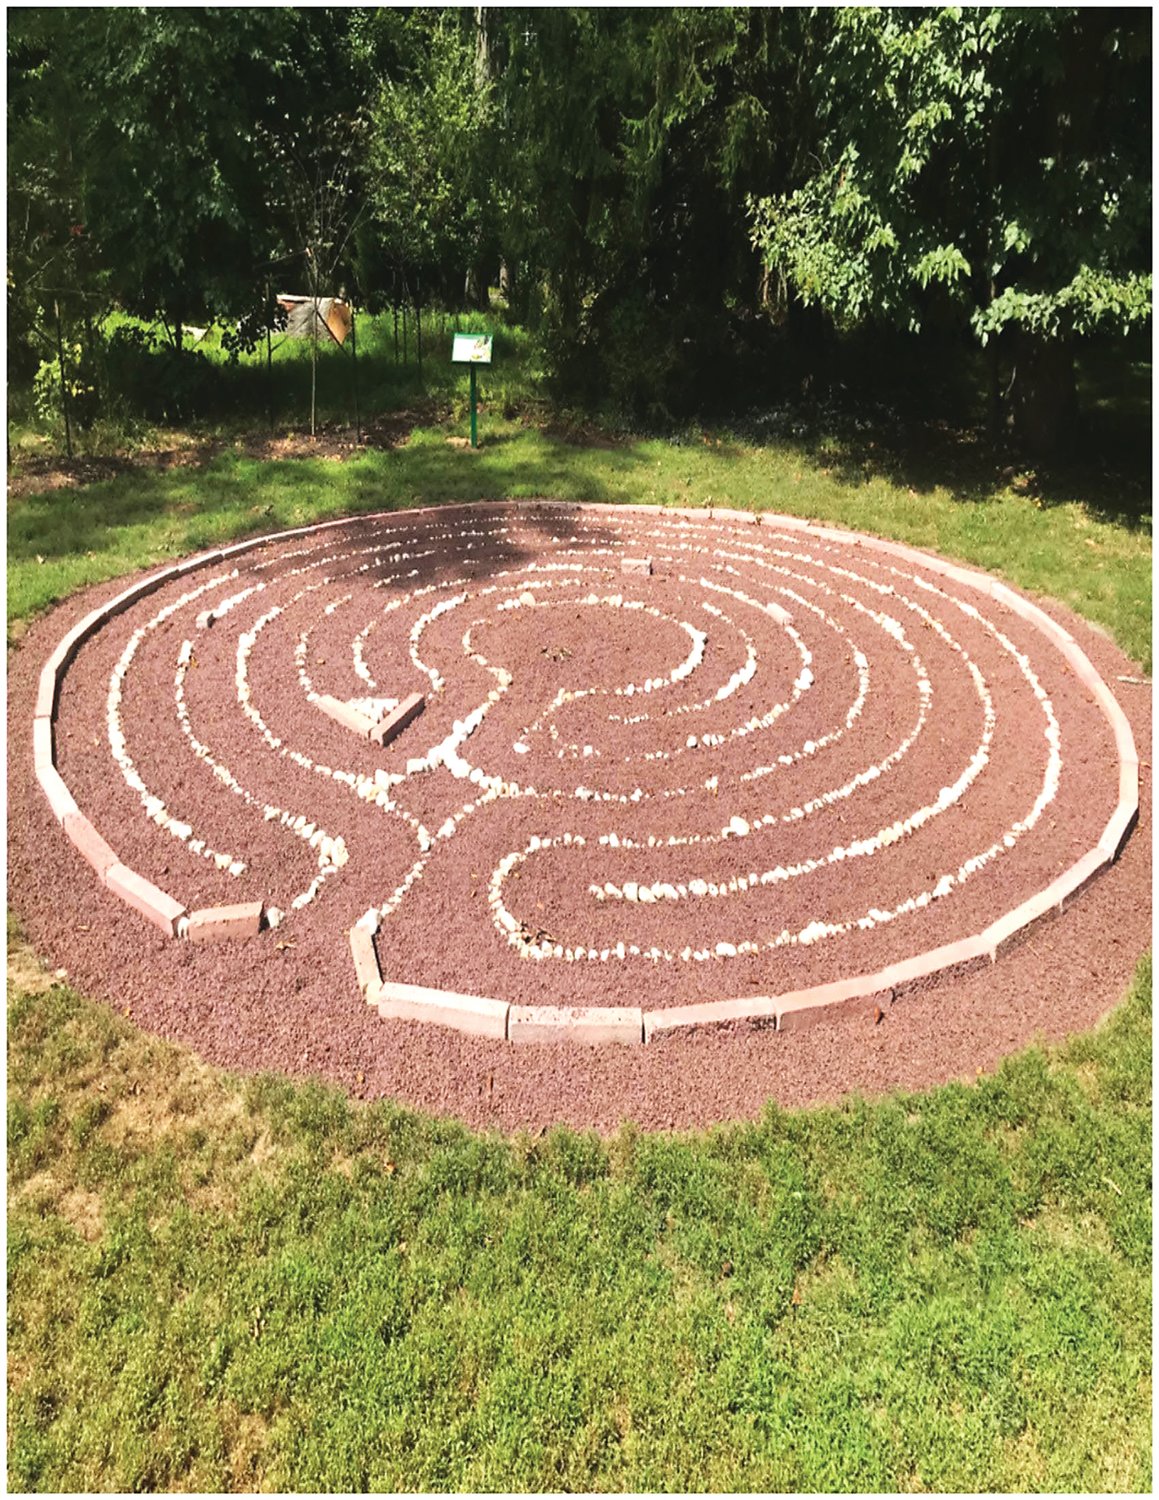 The public is invited to the D&R Greenway Land Trust labyrinth dedication Saturday, Sept. 14.